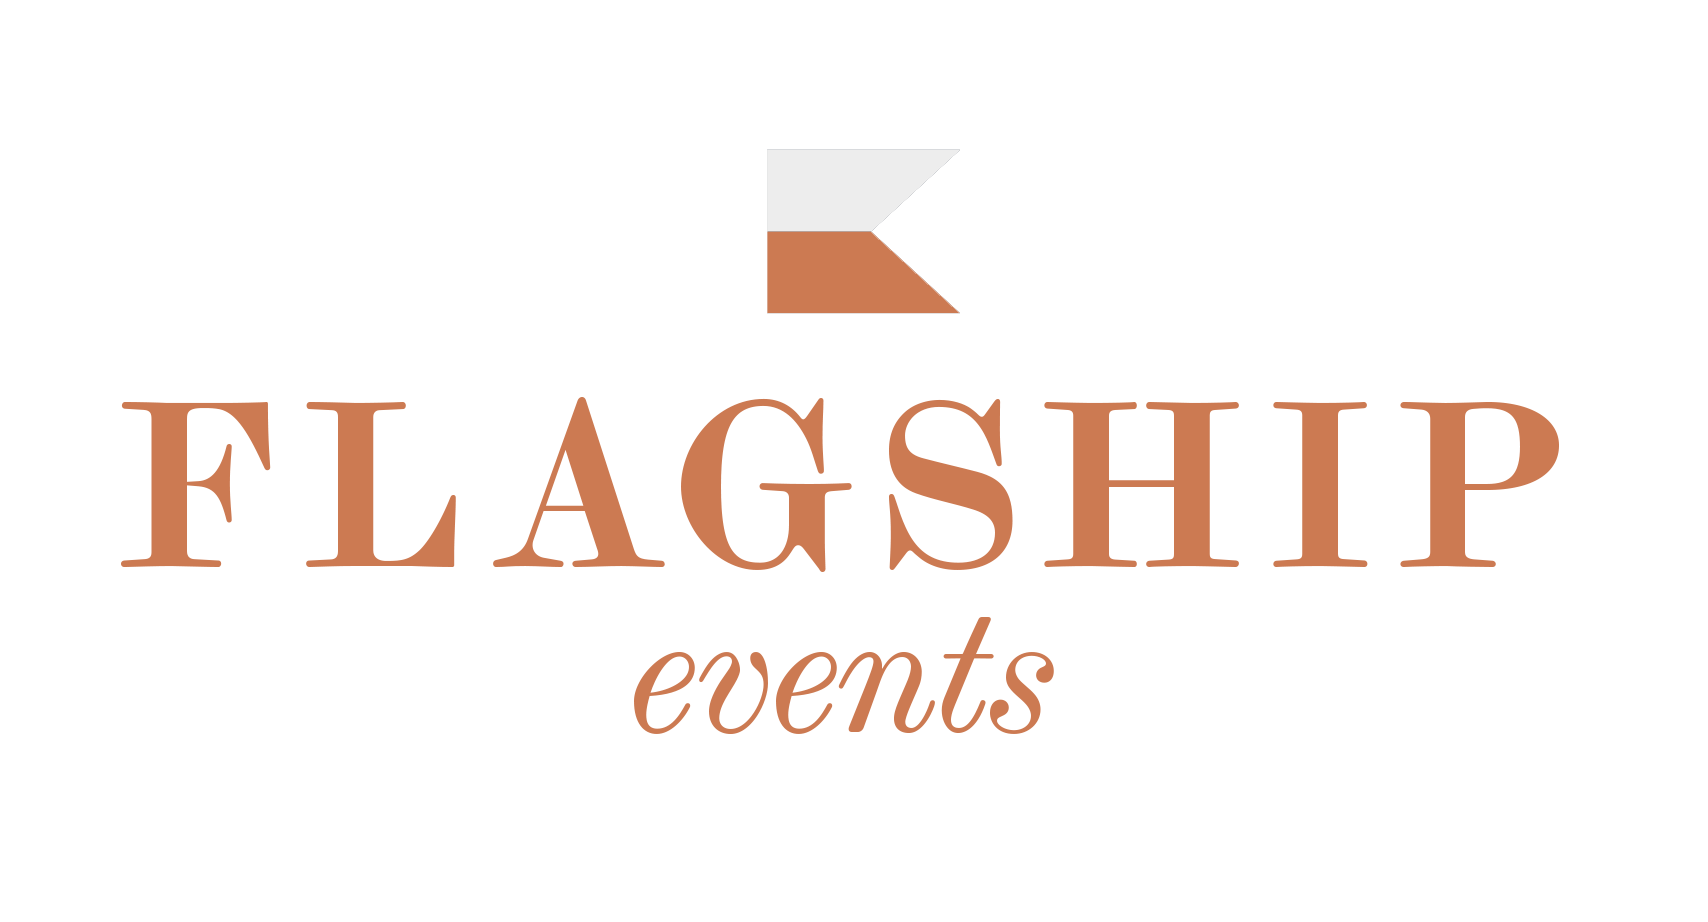 Flagship Events logo - flag in bronze and white with the words Flagship Events underneath